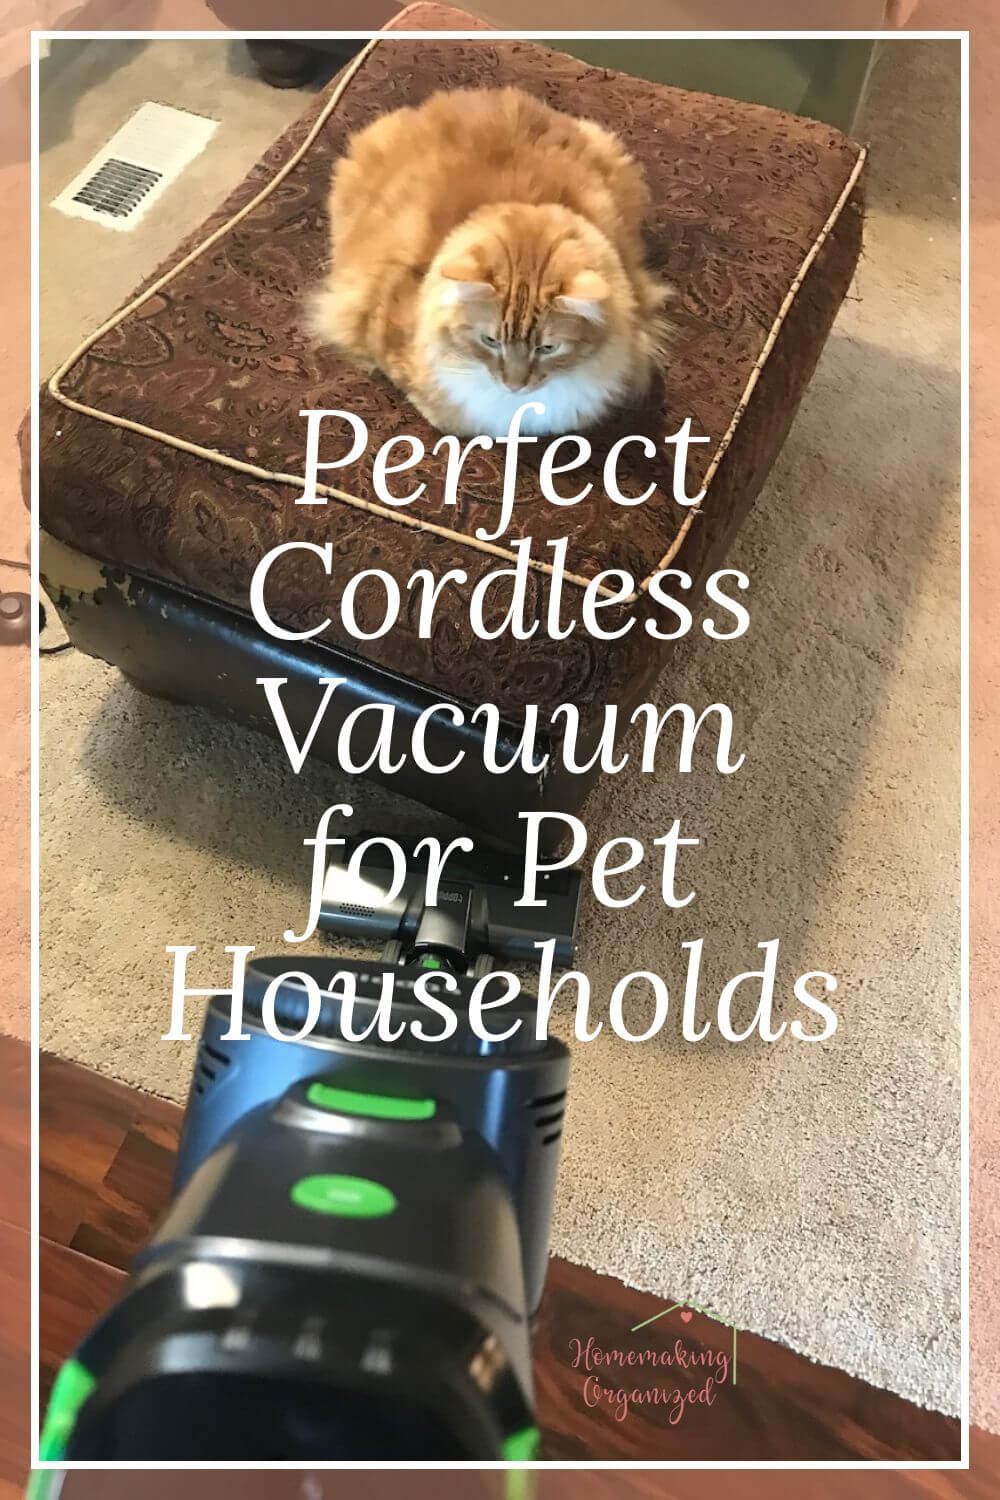 The perfect cordless vacuum for pet households